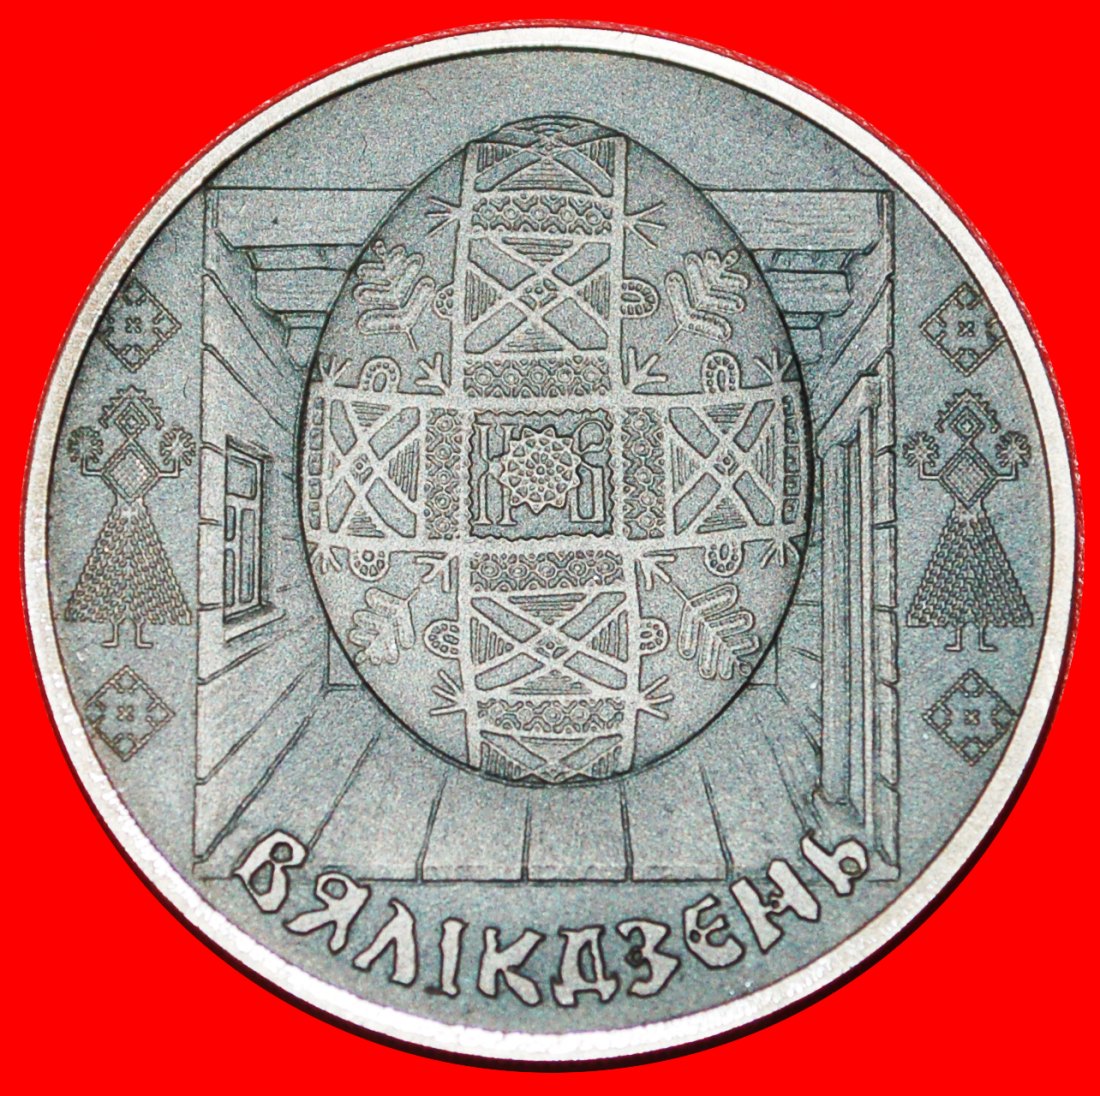  * RARE: belorussia (ex. the USSR, russia)★1 ROUBLE 2005! EASTER EGG ASTRONOMY★LOW START★ NO RESERVE!   